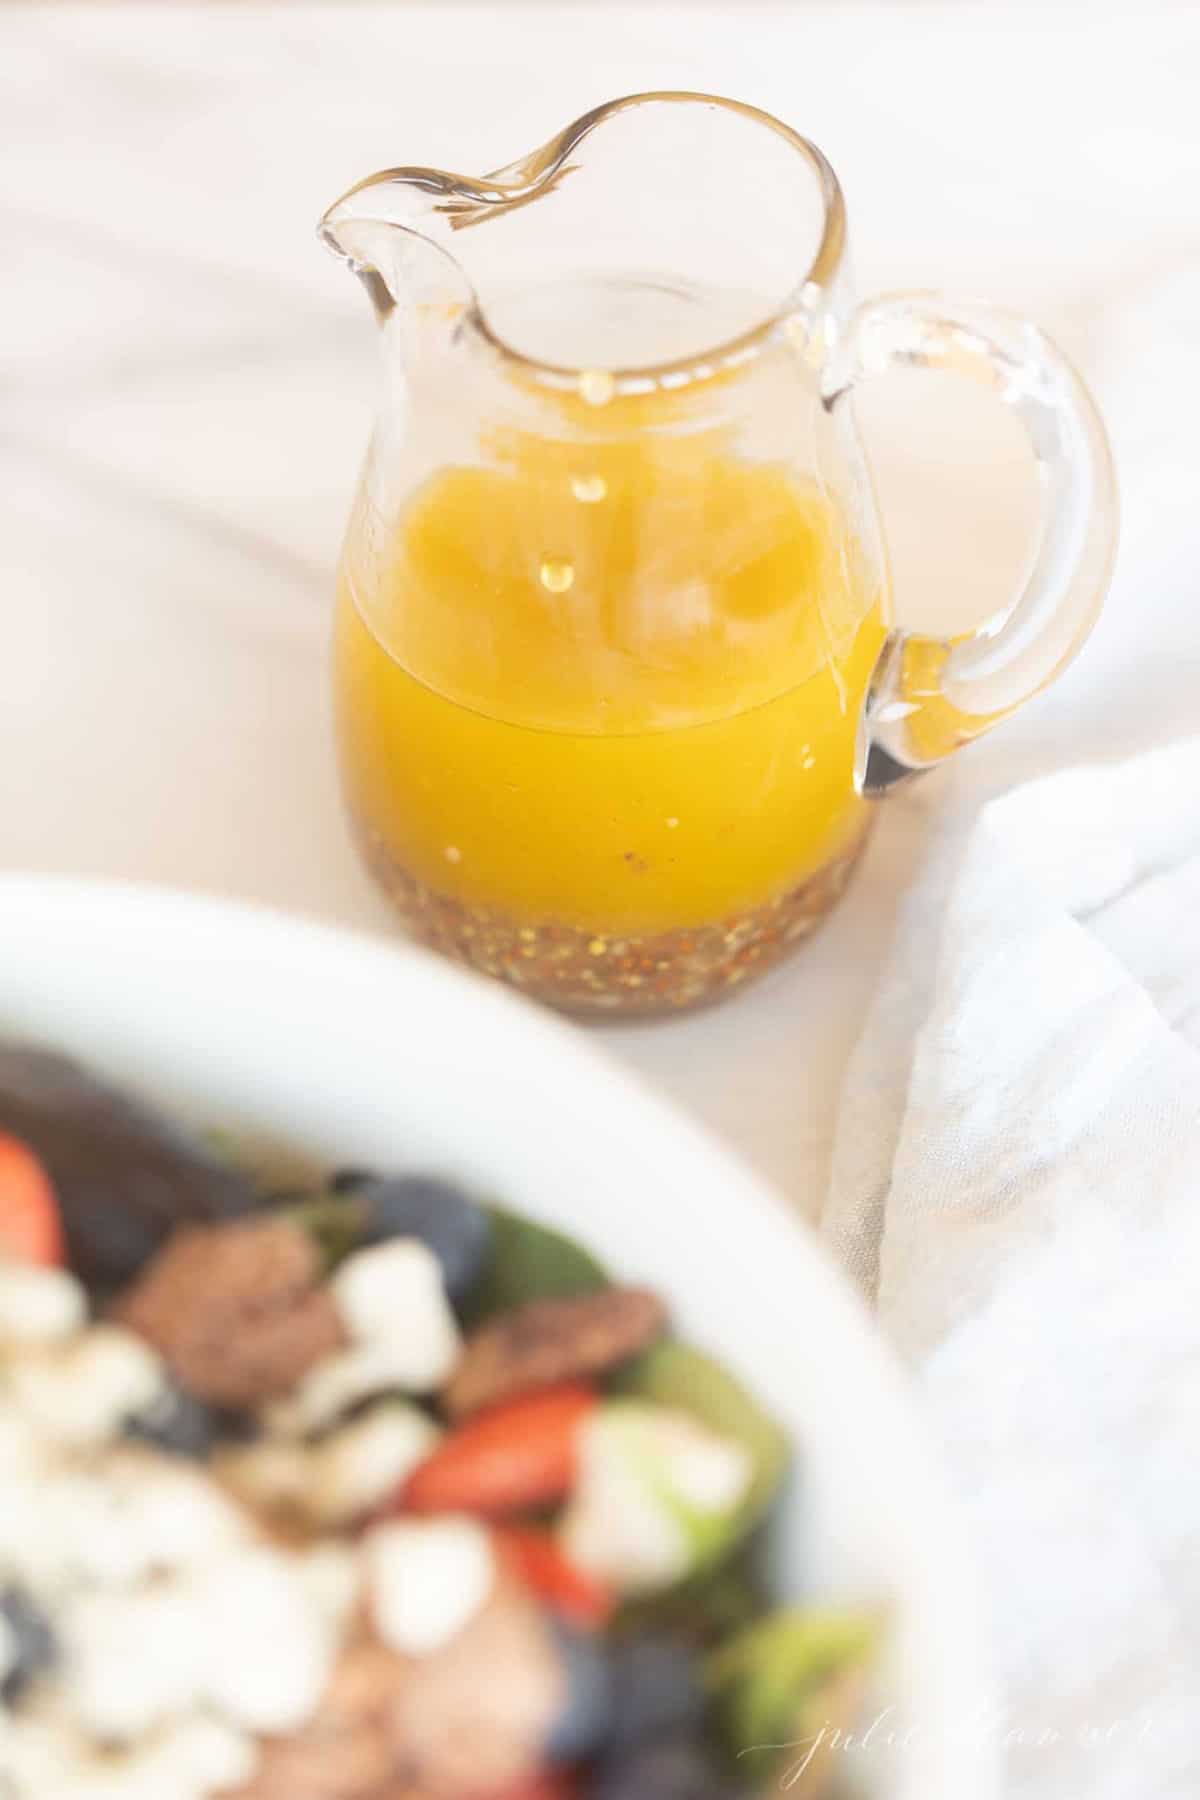 Vinaigrette in a glass pitcher on a marble surface. 